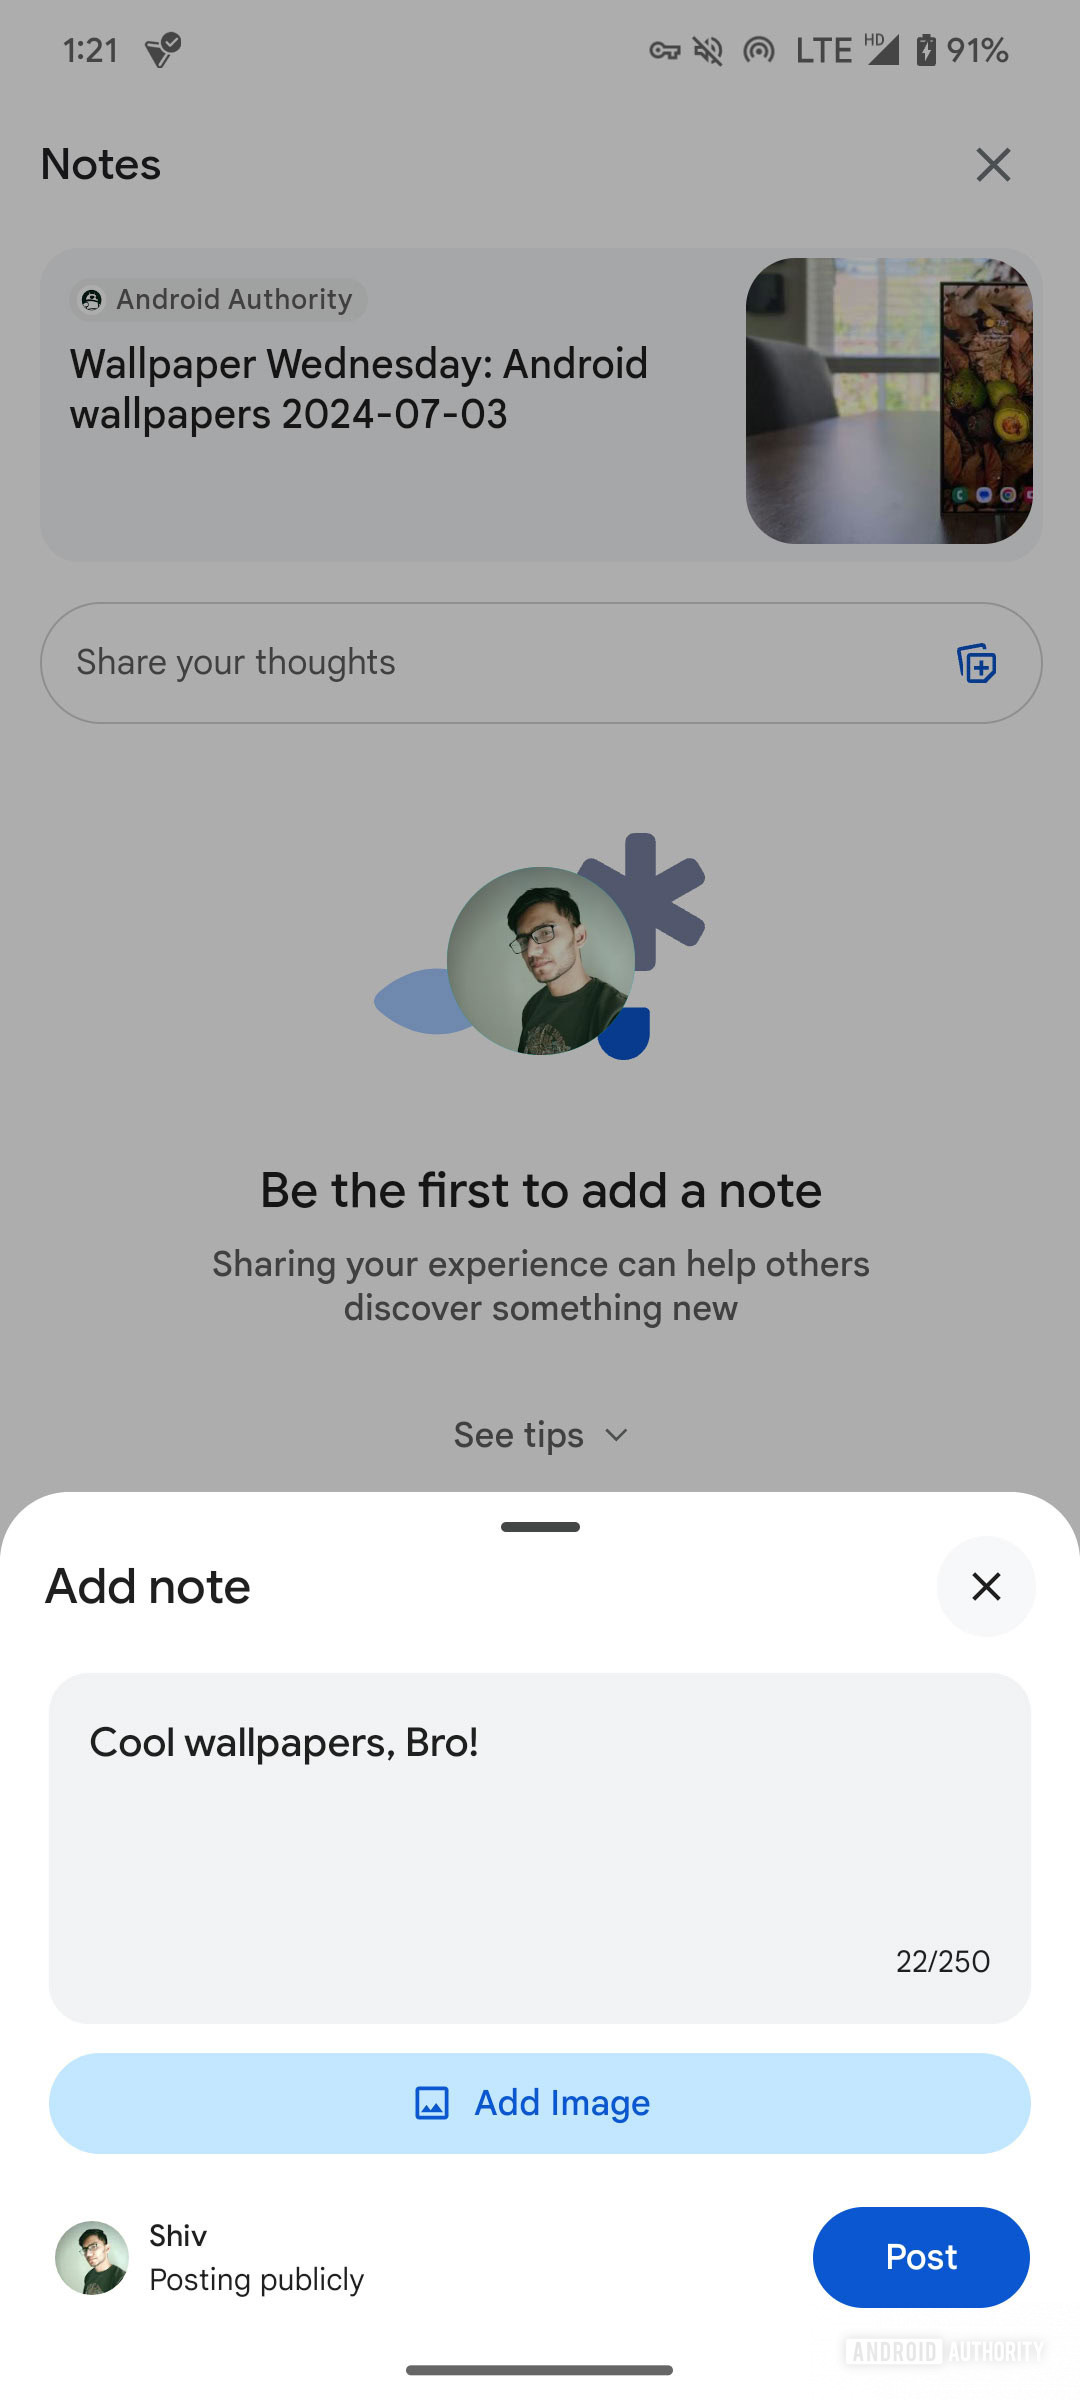 Google Search letting users add Notes without a theme